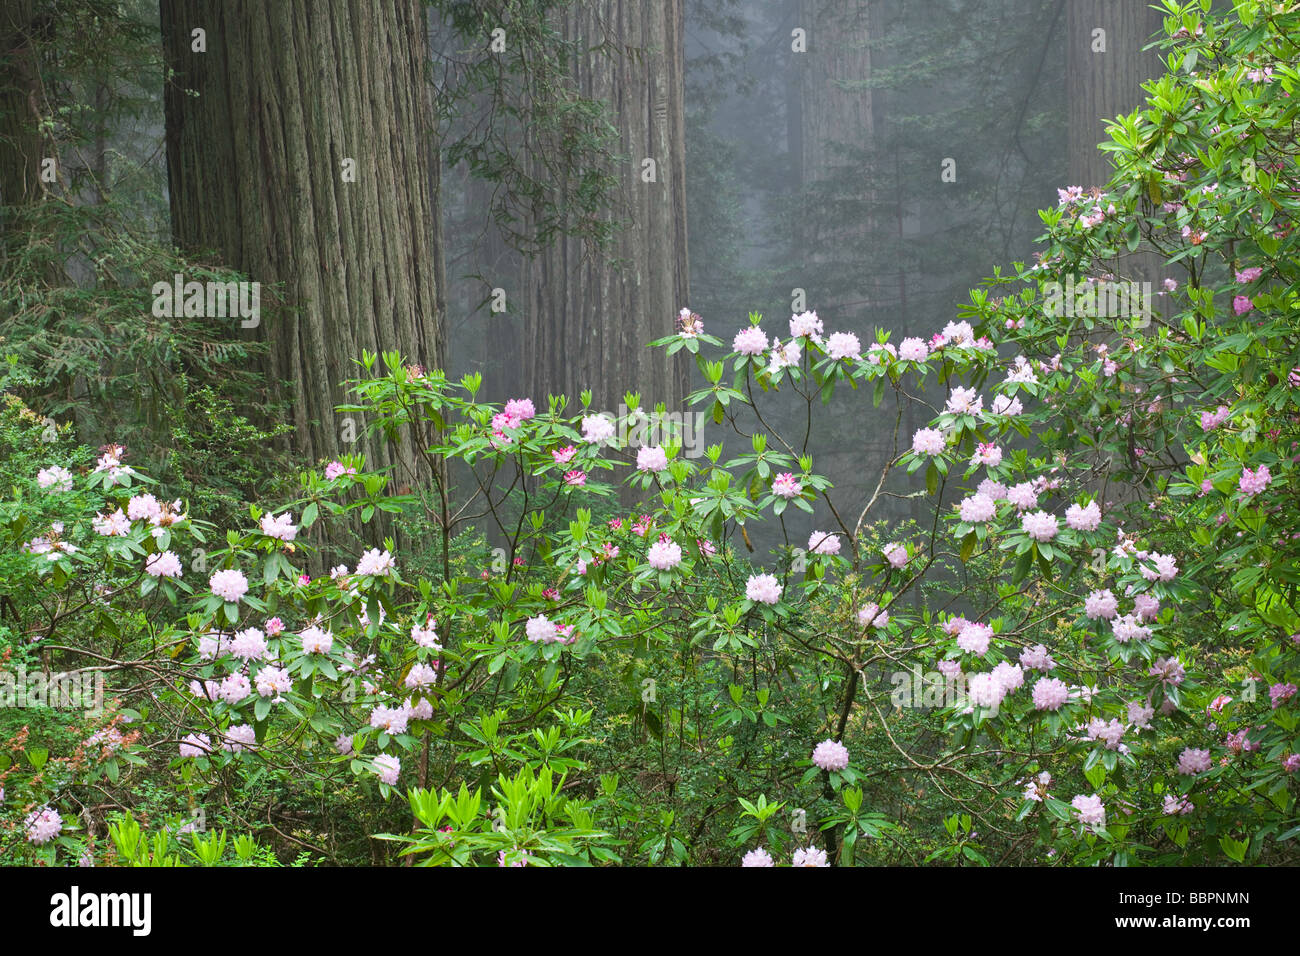 Fog filters through rhododendron bushes and old growth redwood trees in California s Redwood National Park Stock Photo